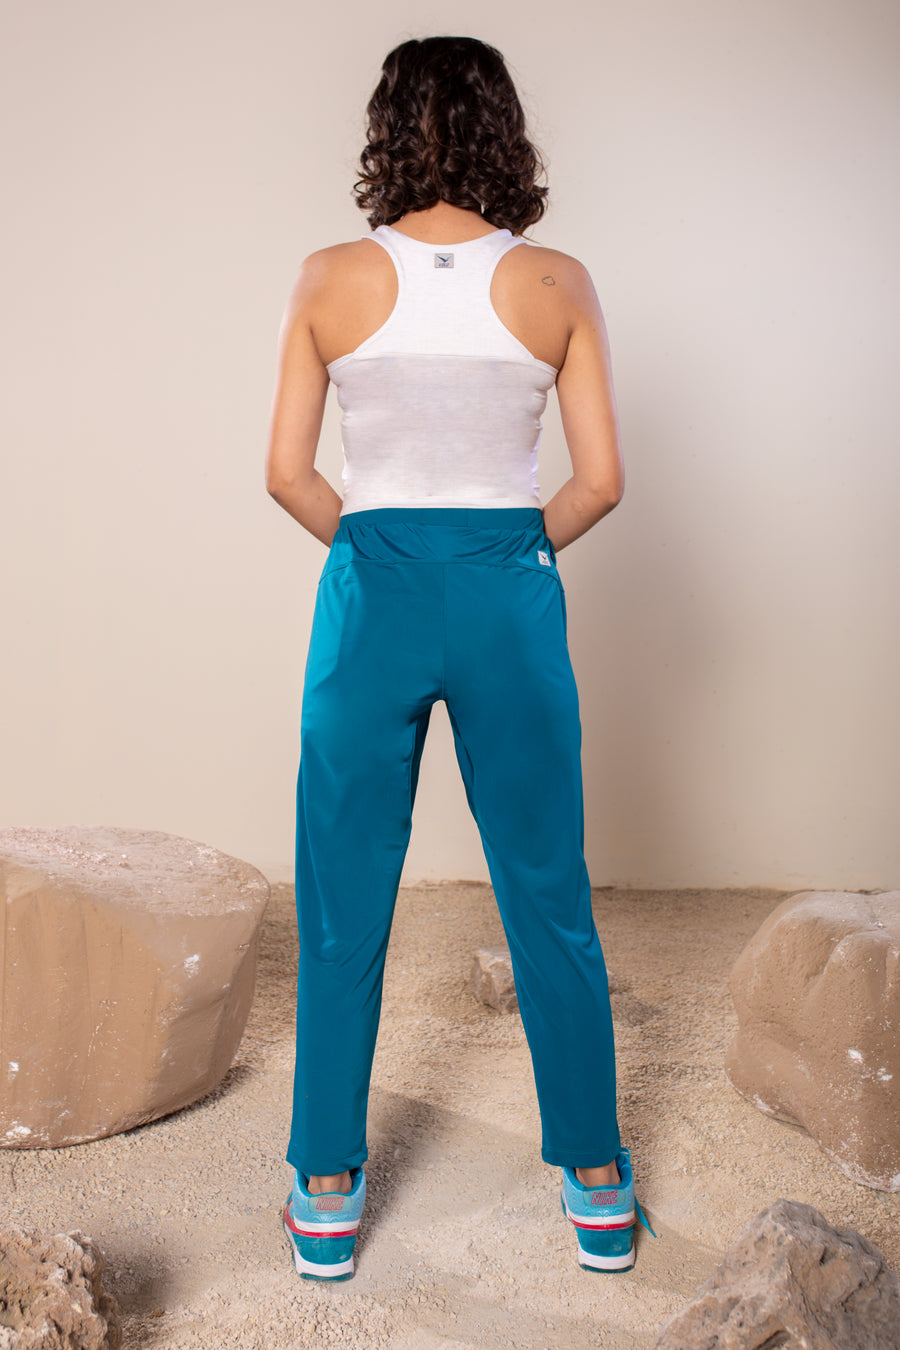 Women's Wanderlust Pant Tropical Teal | VOLO Apparel | These pants are designed to give you wanderlust, an ultralight super durable athletic pant with a five pocket design, a 3 point gusset for all your movements and a high ankle tapered bottom. The revolutional Italian nylon is patented with UPF 50 protection and extreme breathability. The one pant to go everywhere and do everything!